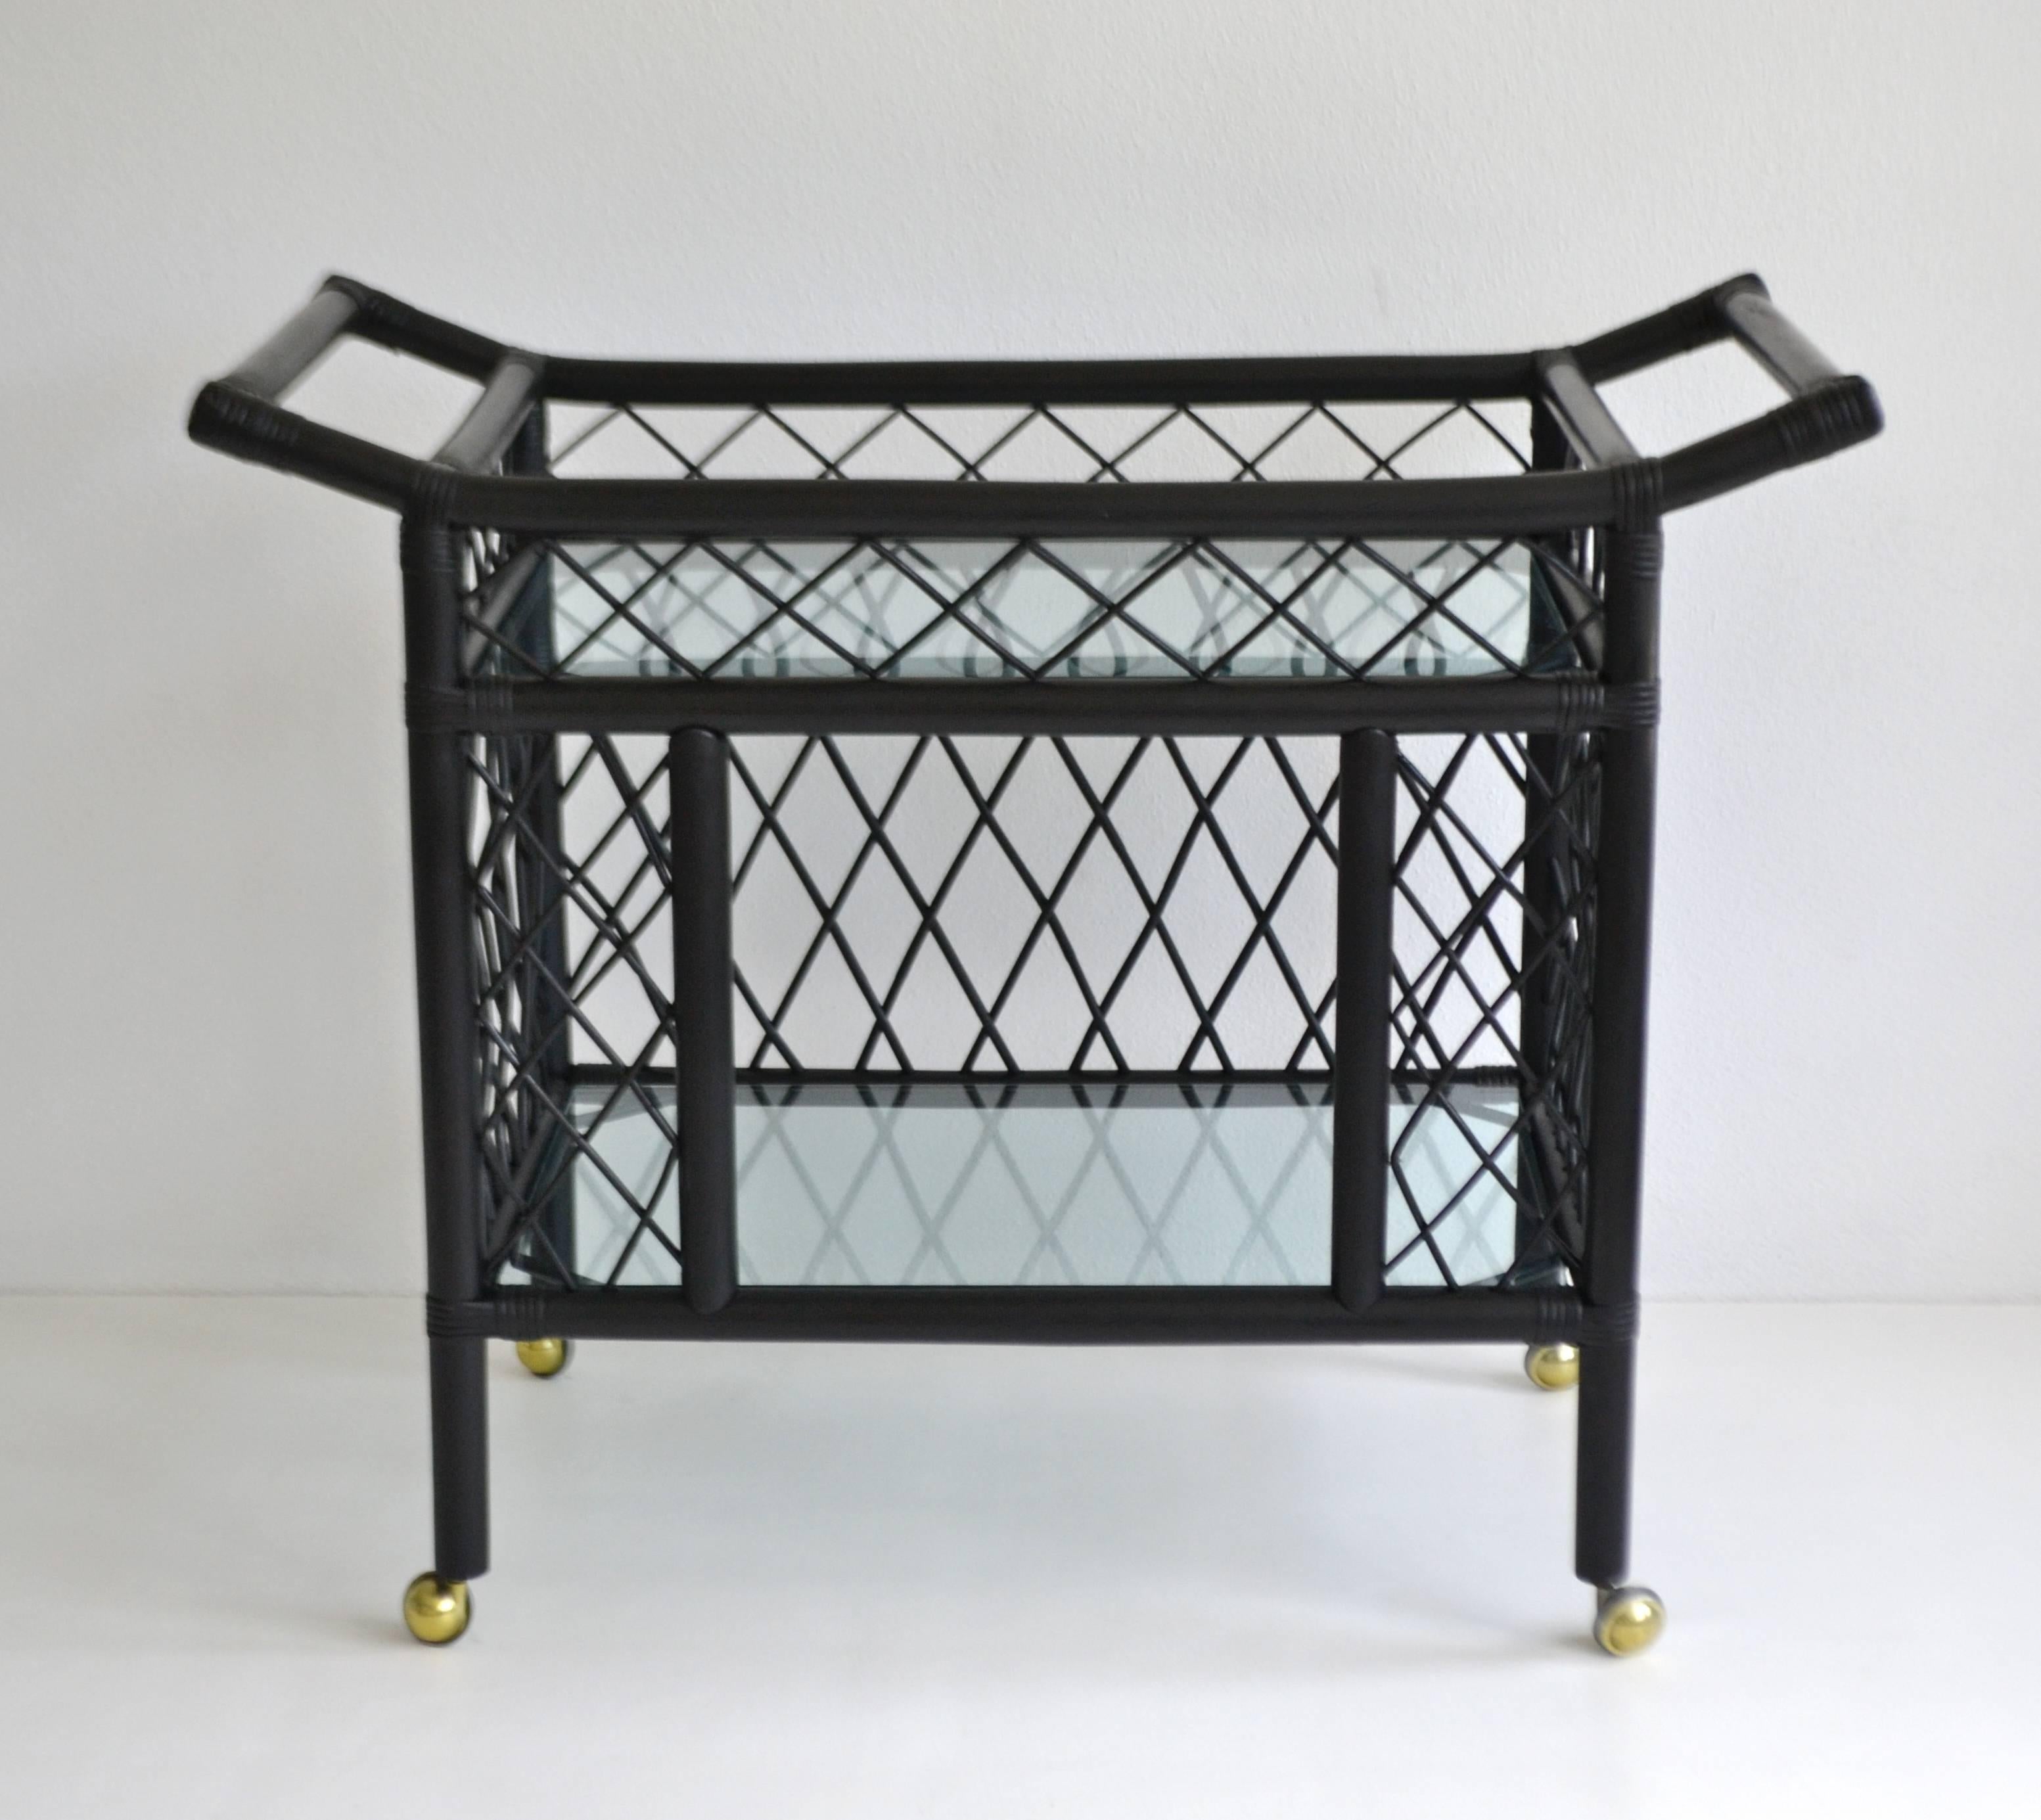 Glamorous midcentury black lacquered bamboo bar cart, circa 1960s. This stunning sculptural two-tier bar cart / sideboard is designed with an open woven reed fretwork pattern. The exquisitely crafted serving cart is outfitted with two large inset